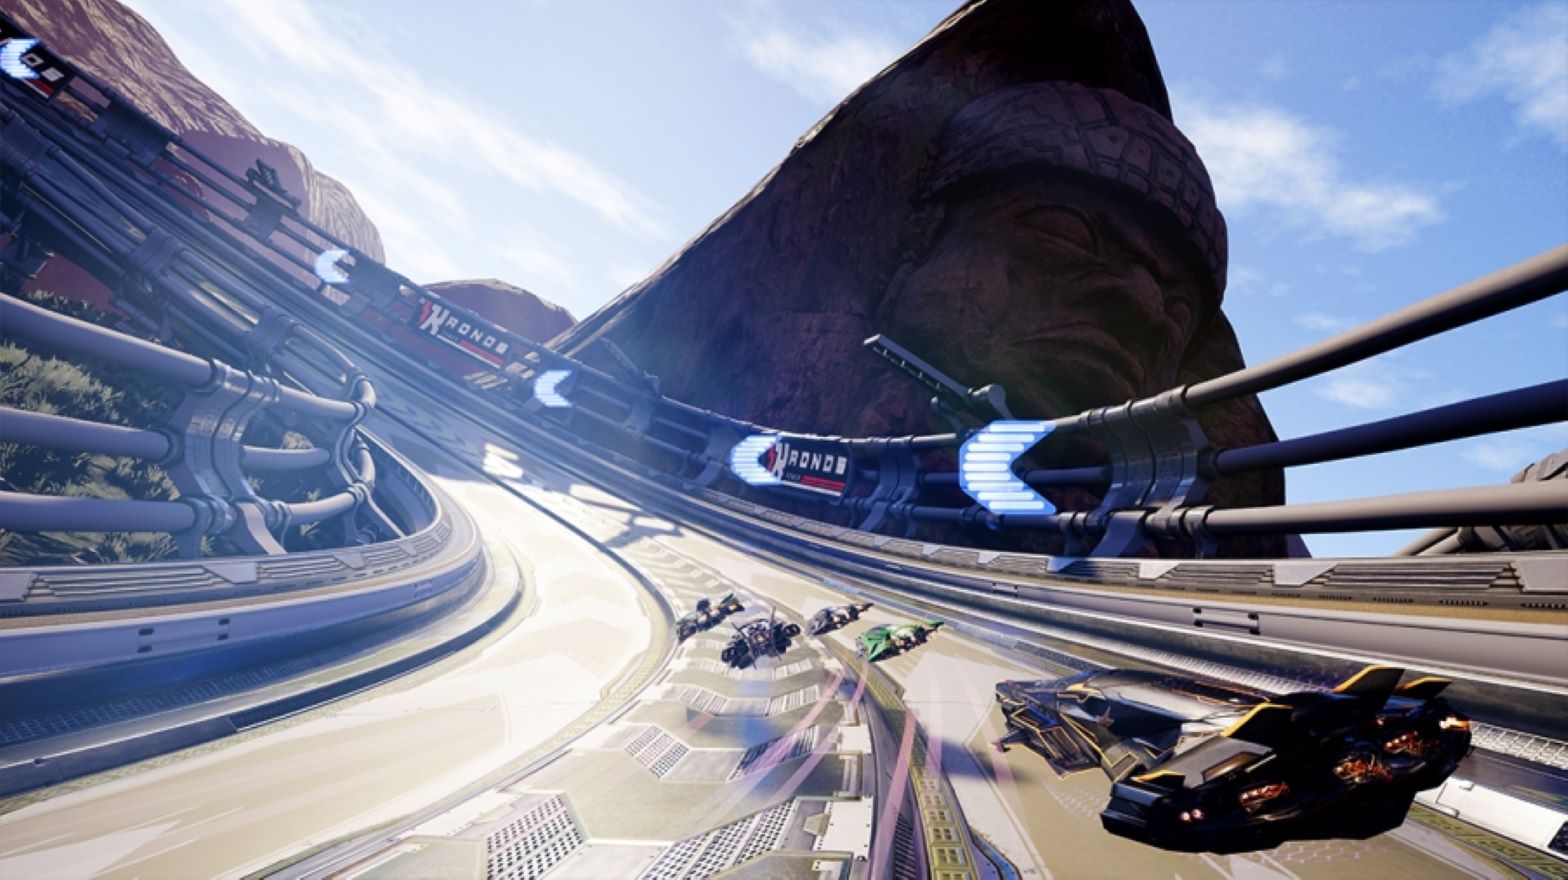 cars on a race track near a mountain with a face on it